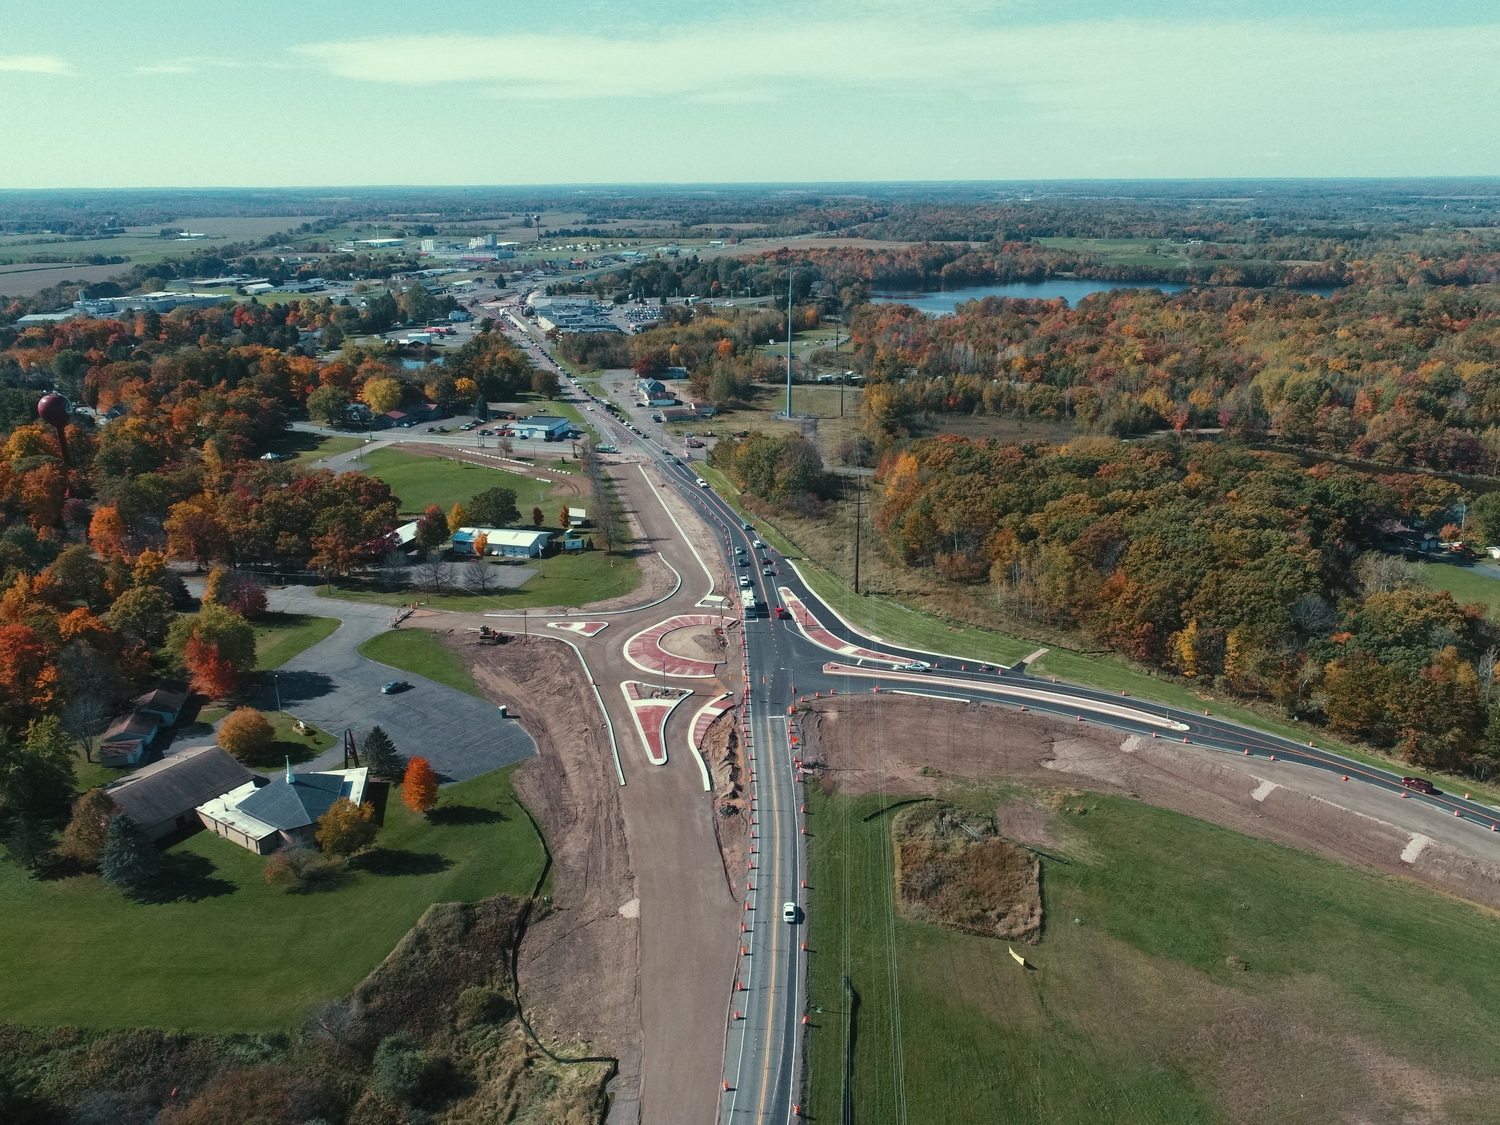 During construction of a new roundabout at the intersection of U.S. Highway 8/63 and County K/Norway Road in the Village of Turtle Lake, Wisconsin. Designed by MSA Professional Services.